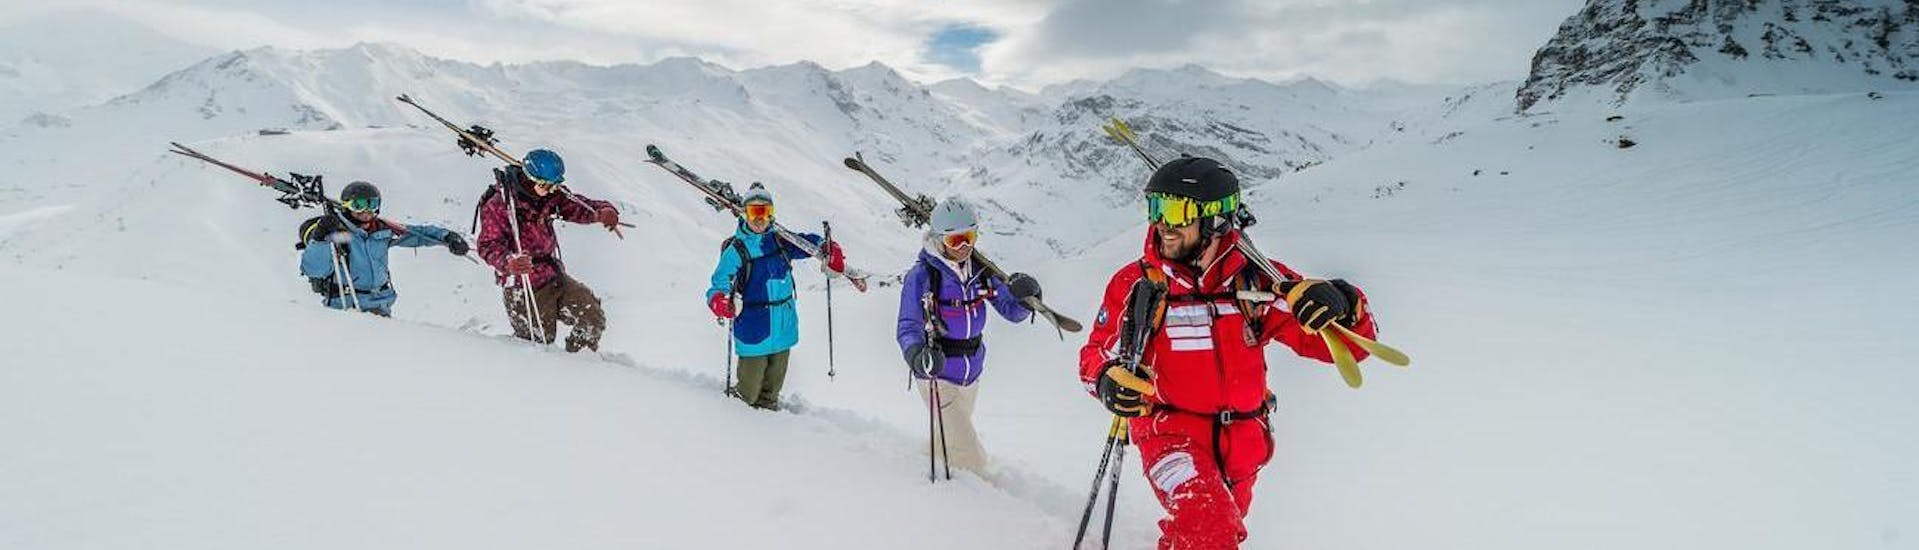 Ski enthusiasts are heading up during the Off Piste Skiing Lessons - All Ages to enjoy the freedom of off-piste skiing under the guidance of a certified instructor from ESF Val d'Isère.